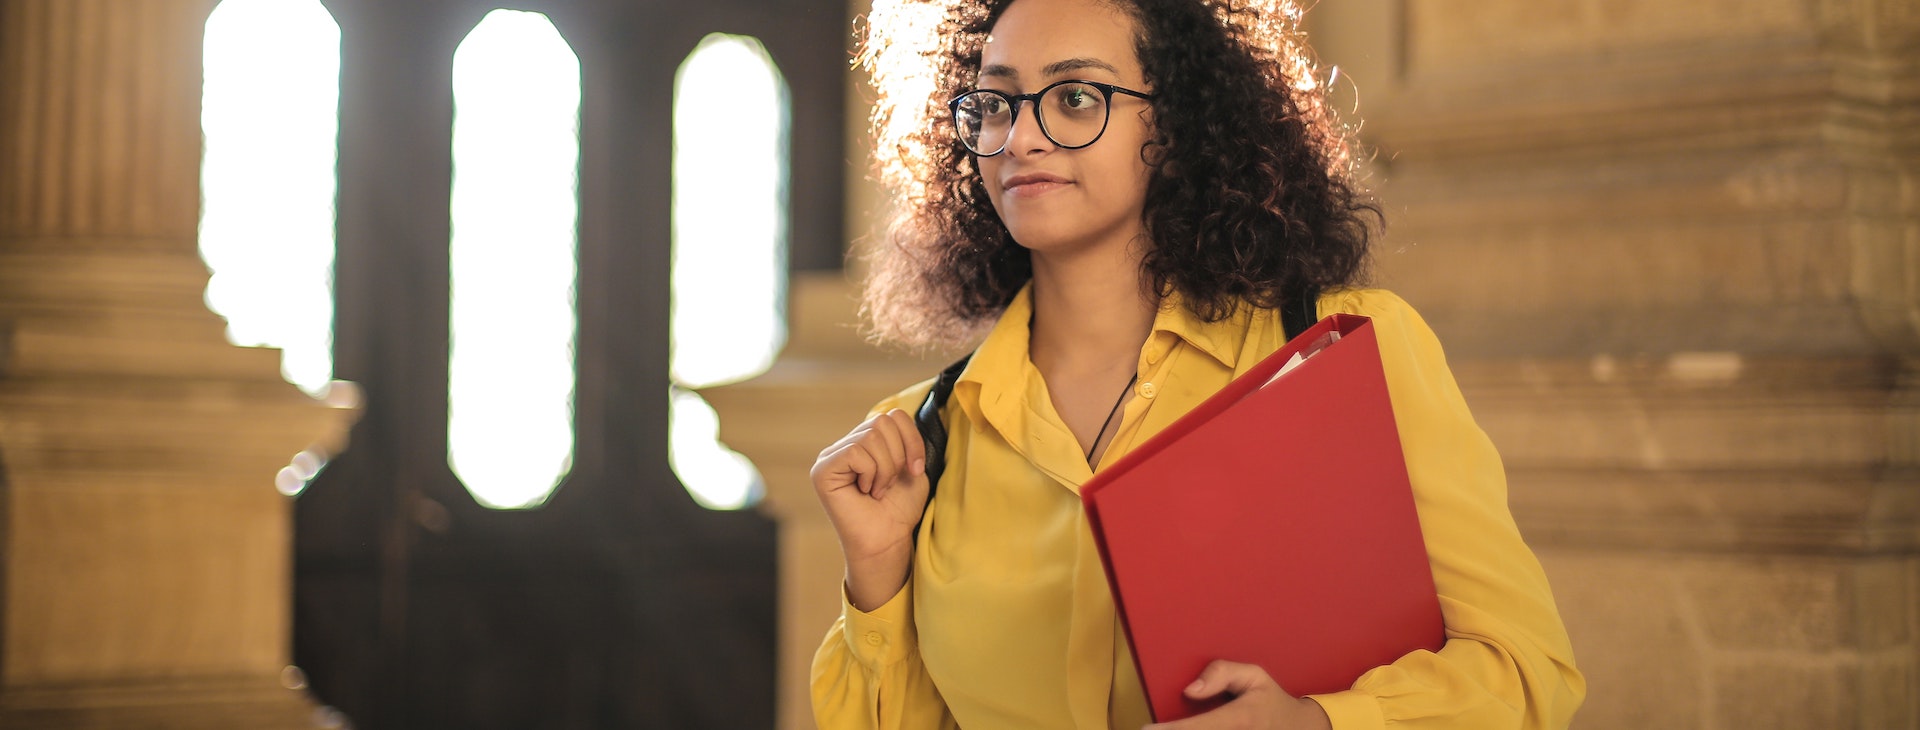 Young woman wearing glasses carrying red binder